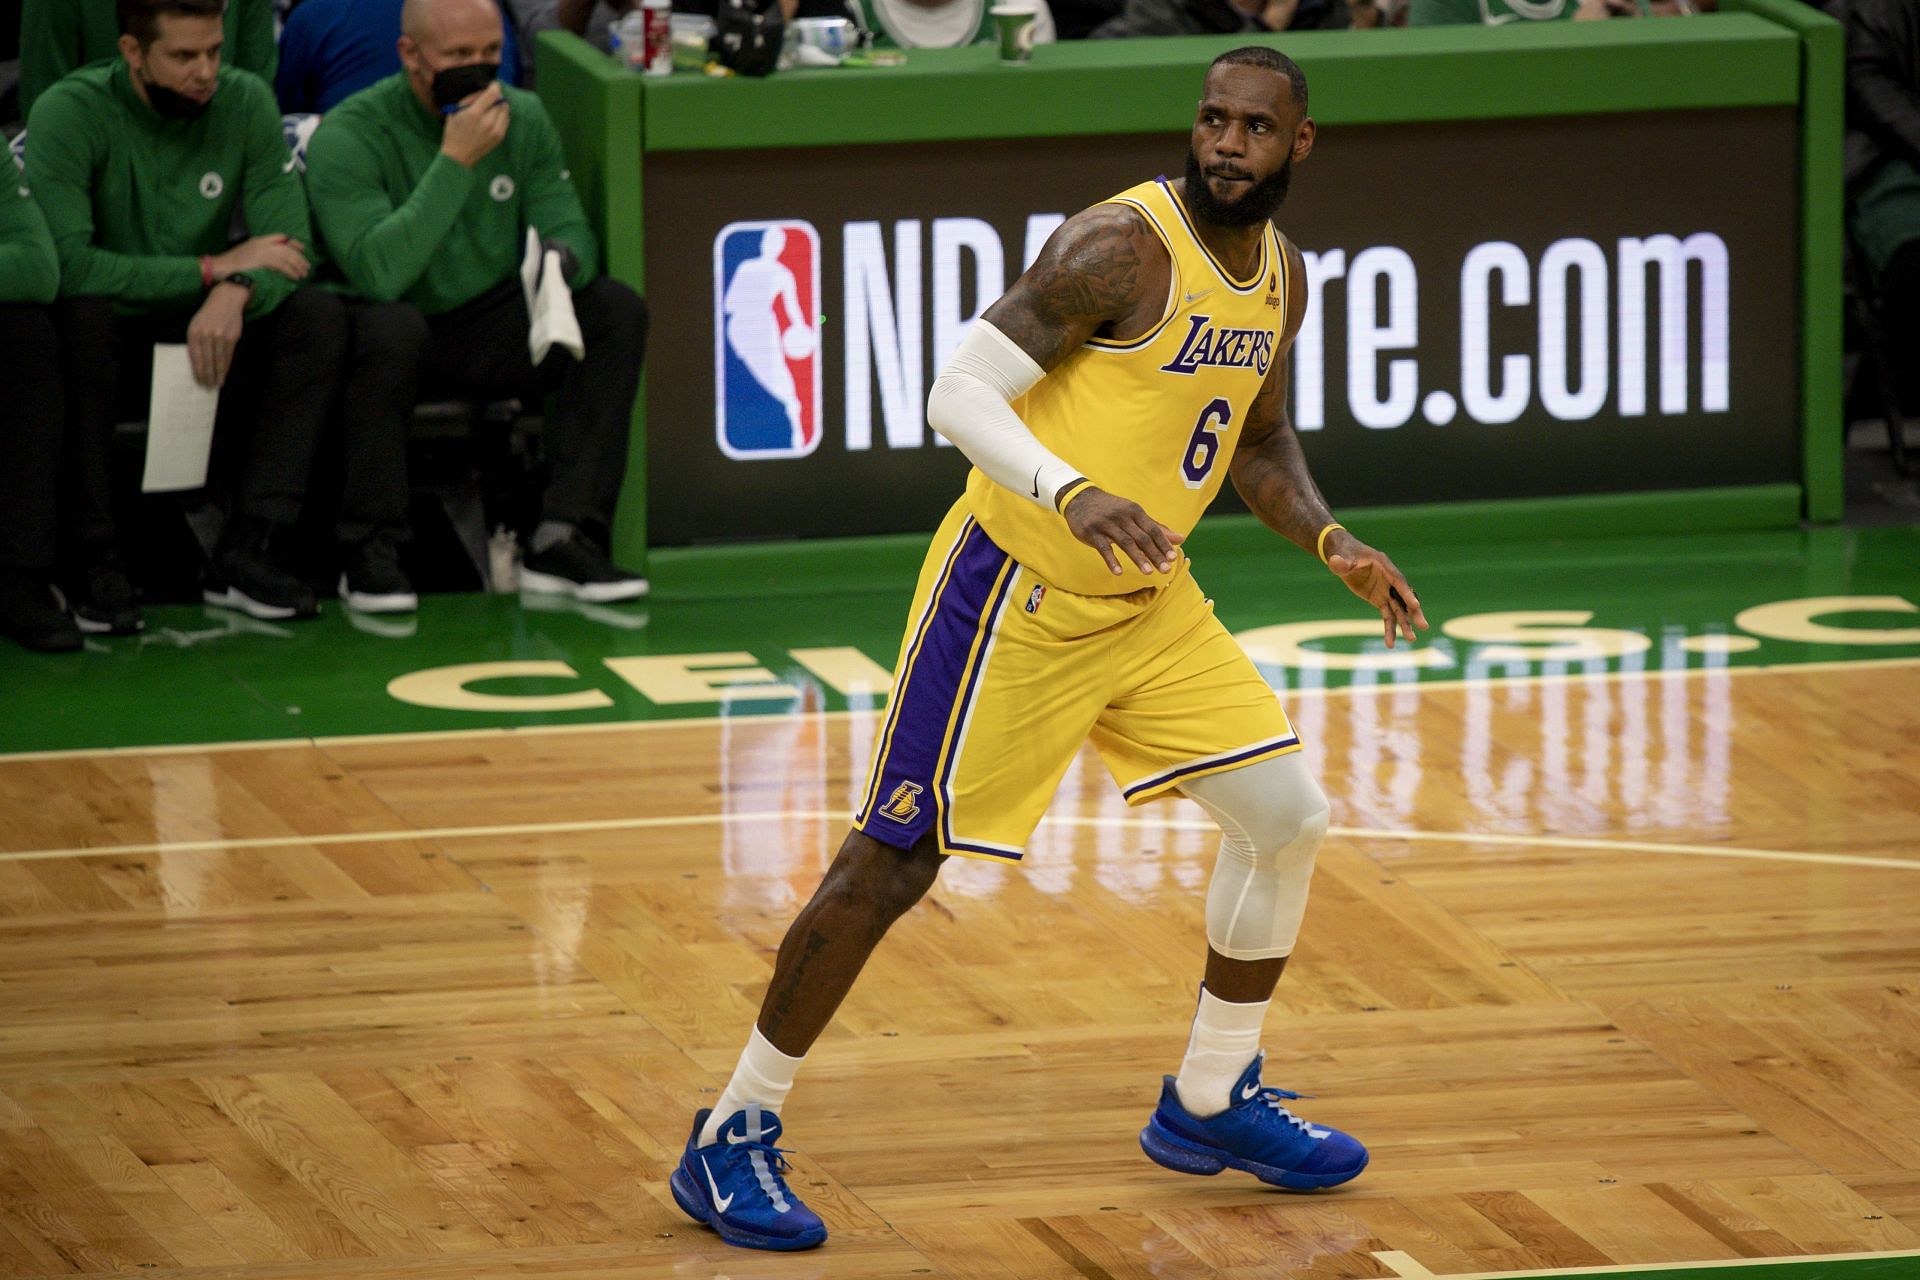 Los Angeles Lakers All-Star LeBron James on the court